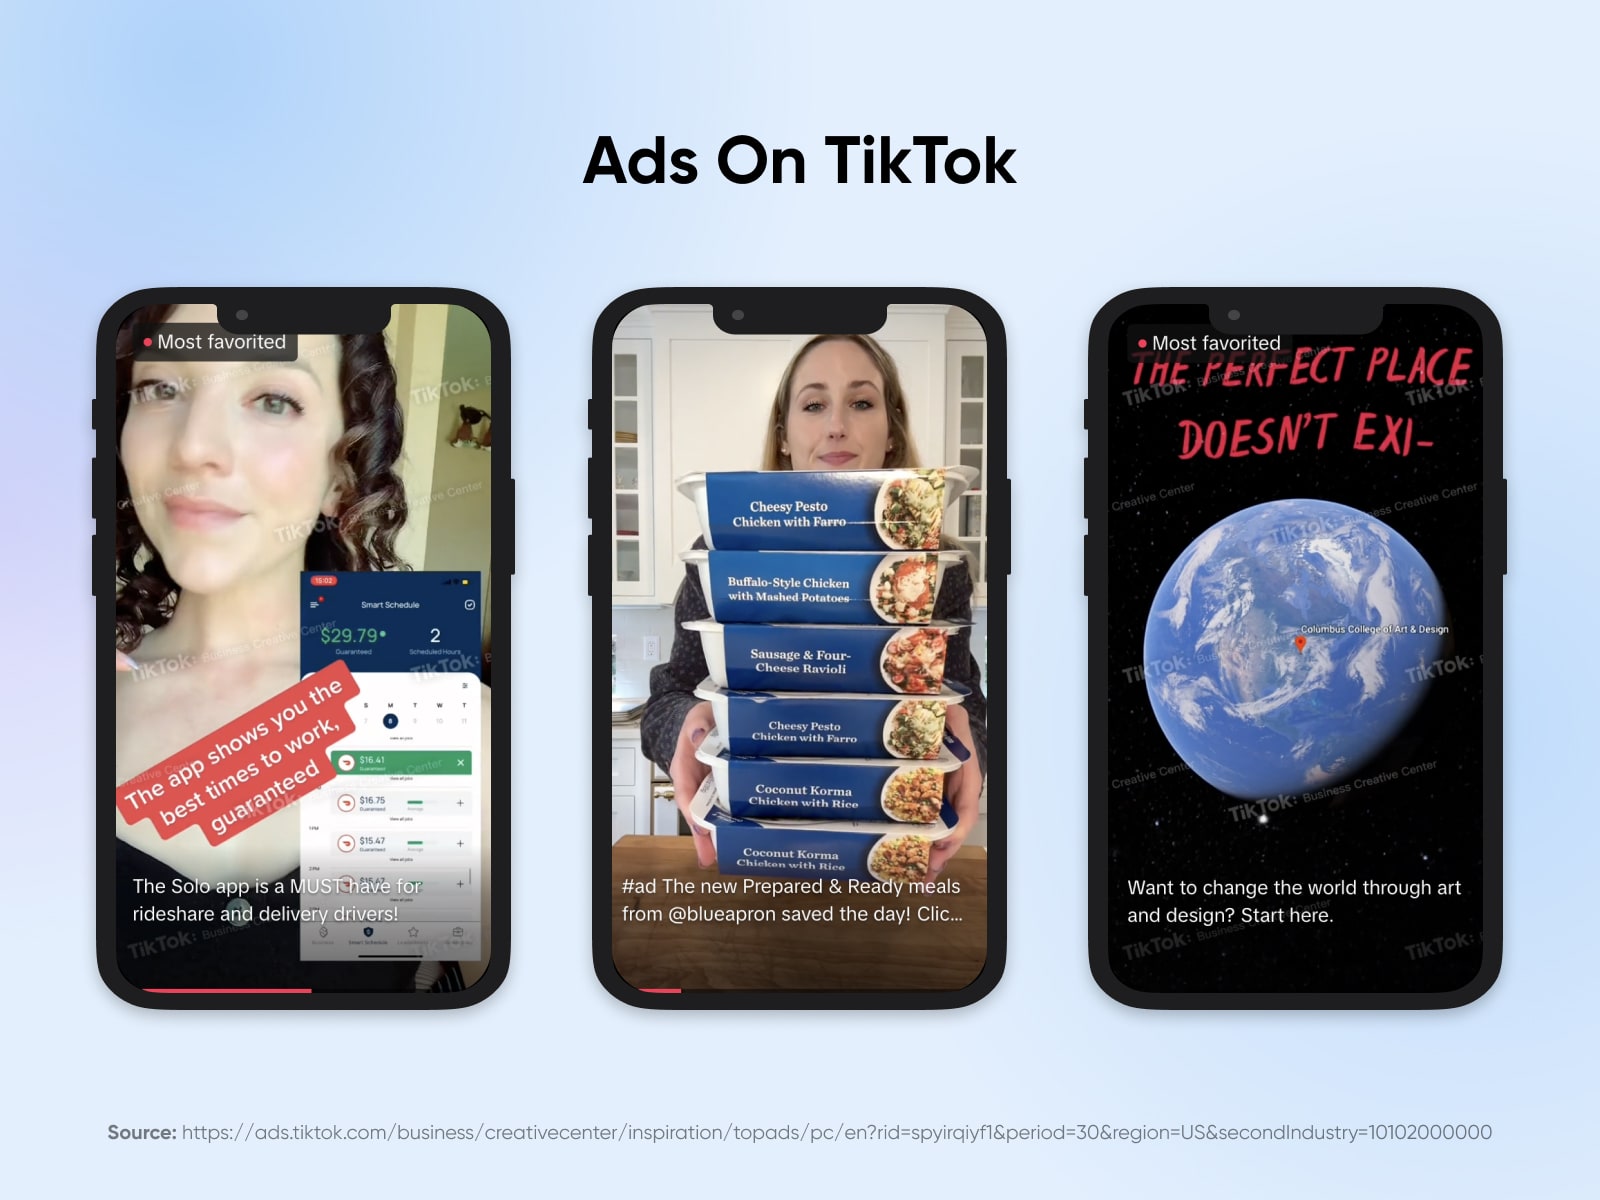 Three examples of ads on TikTok appear against a light blue background